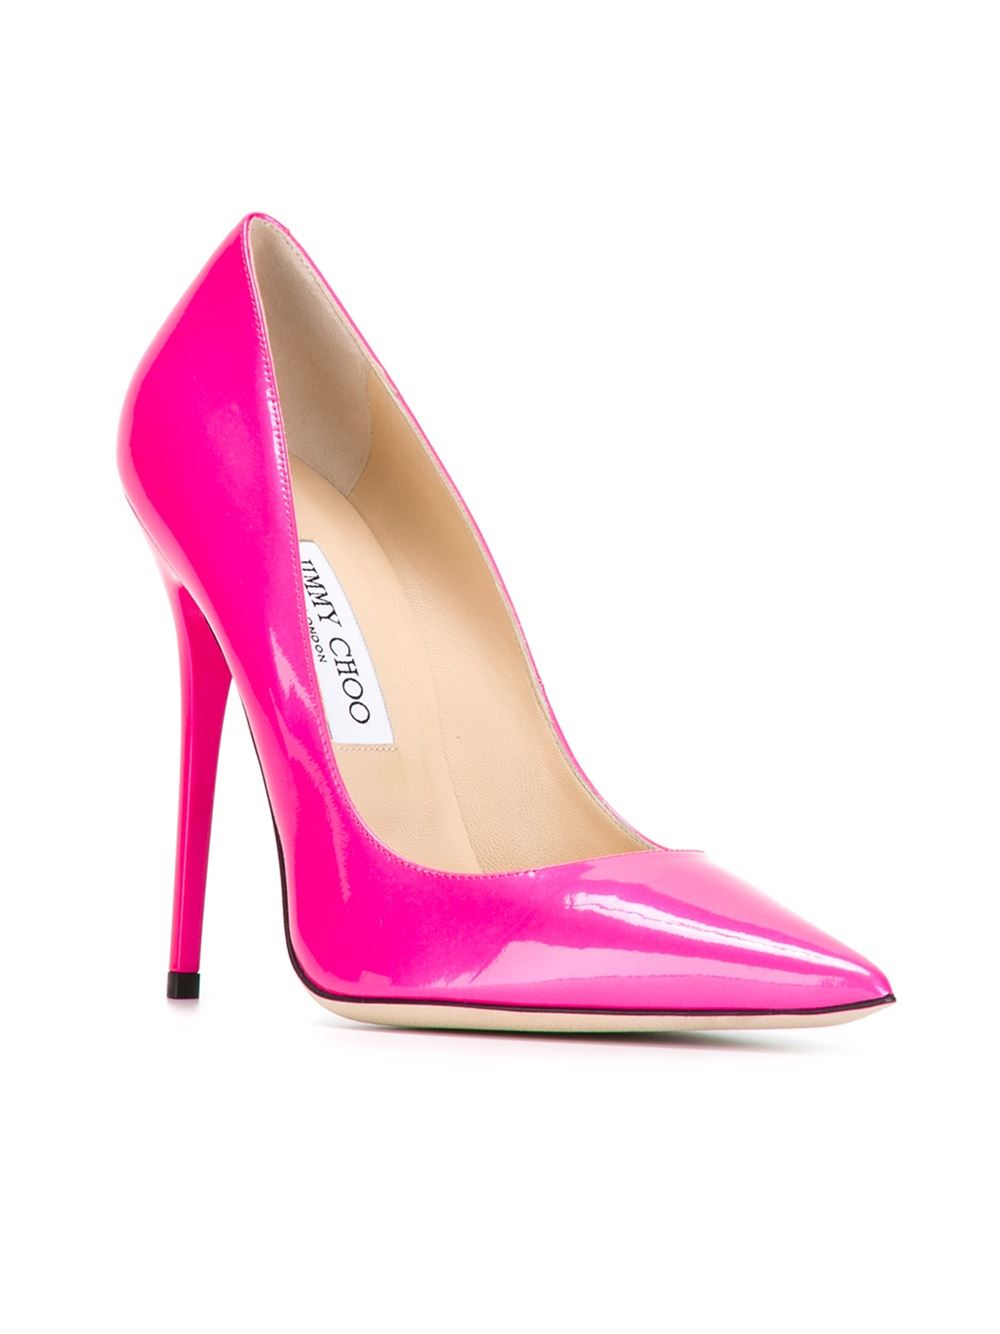 Jimmy choo Anouk Patent-Leather Pumps in Pink (pink & purple) | Lyst